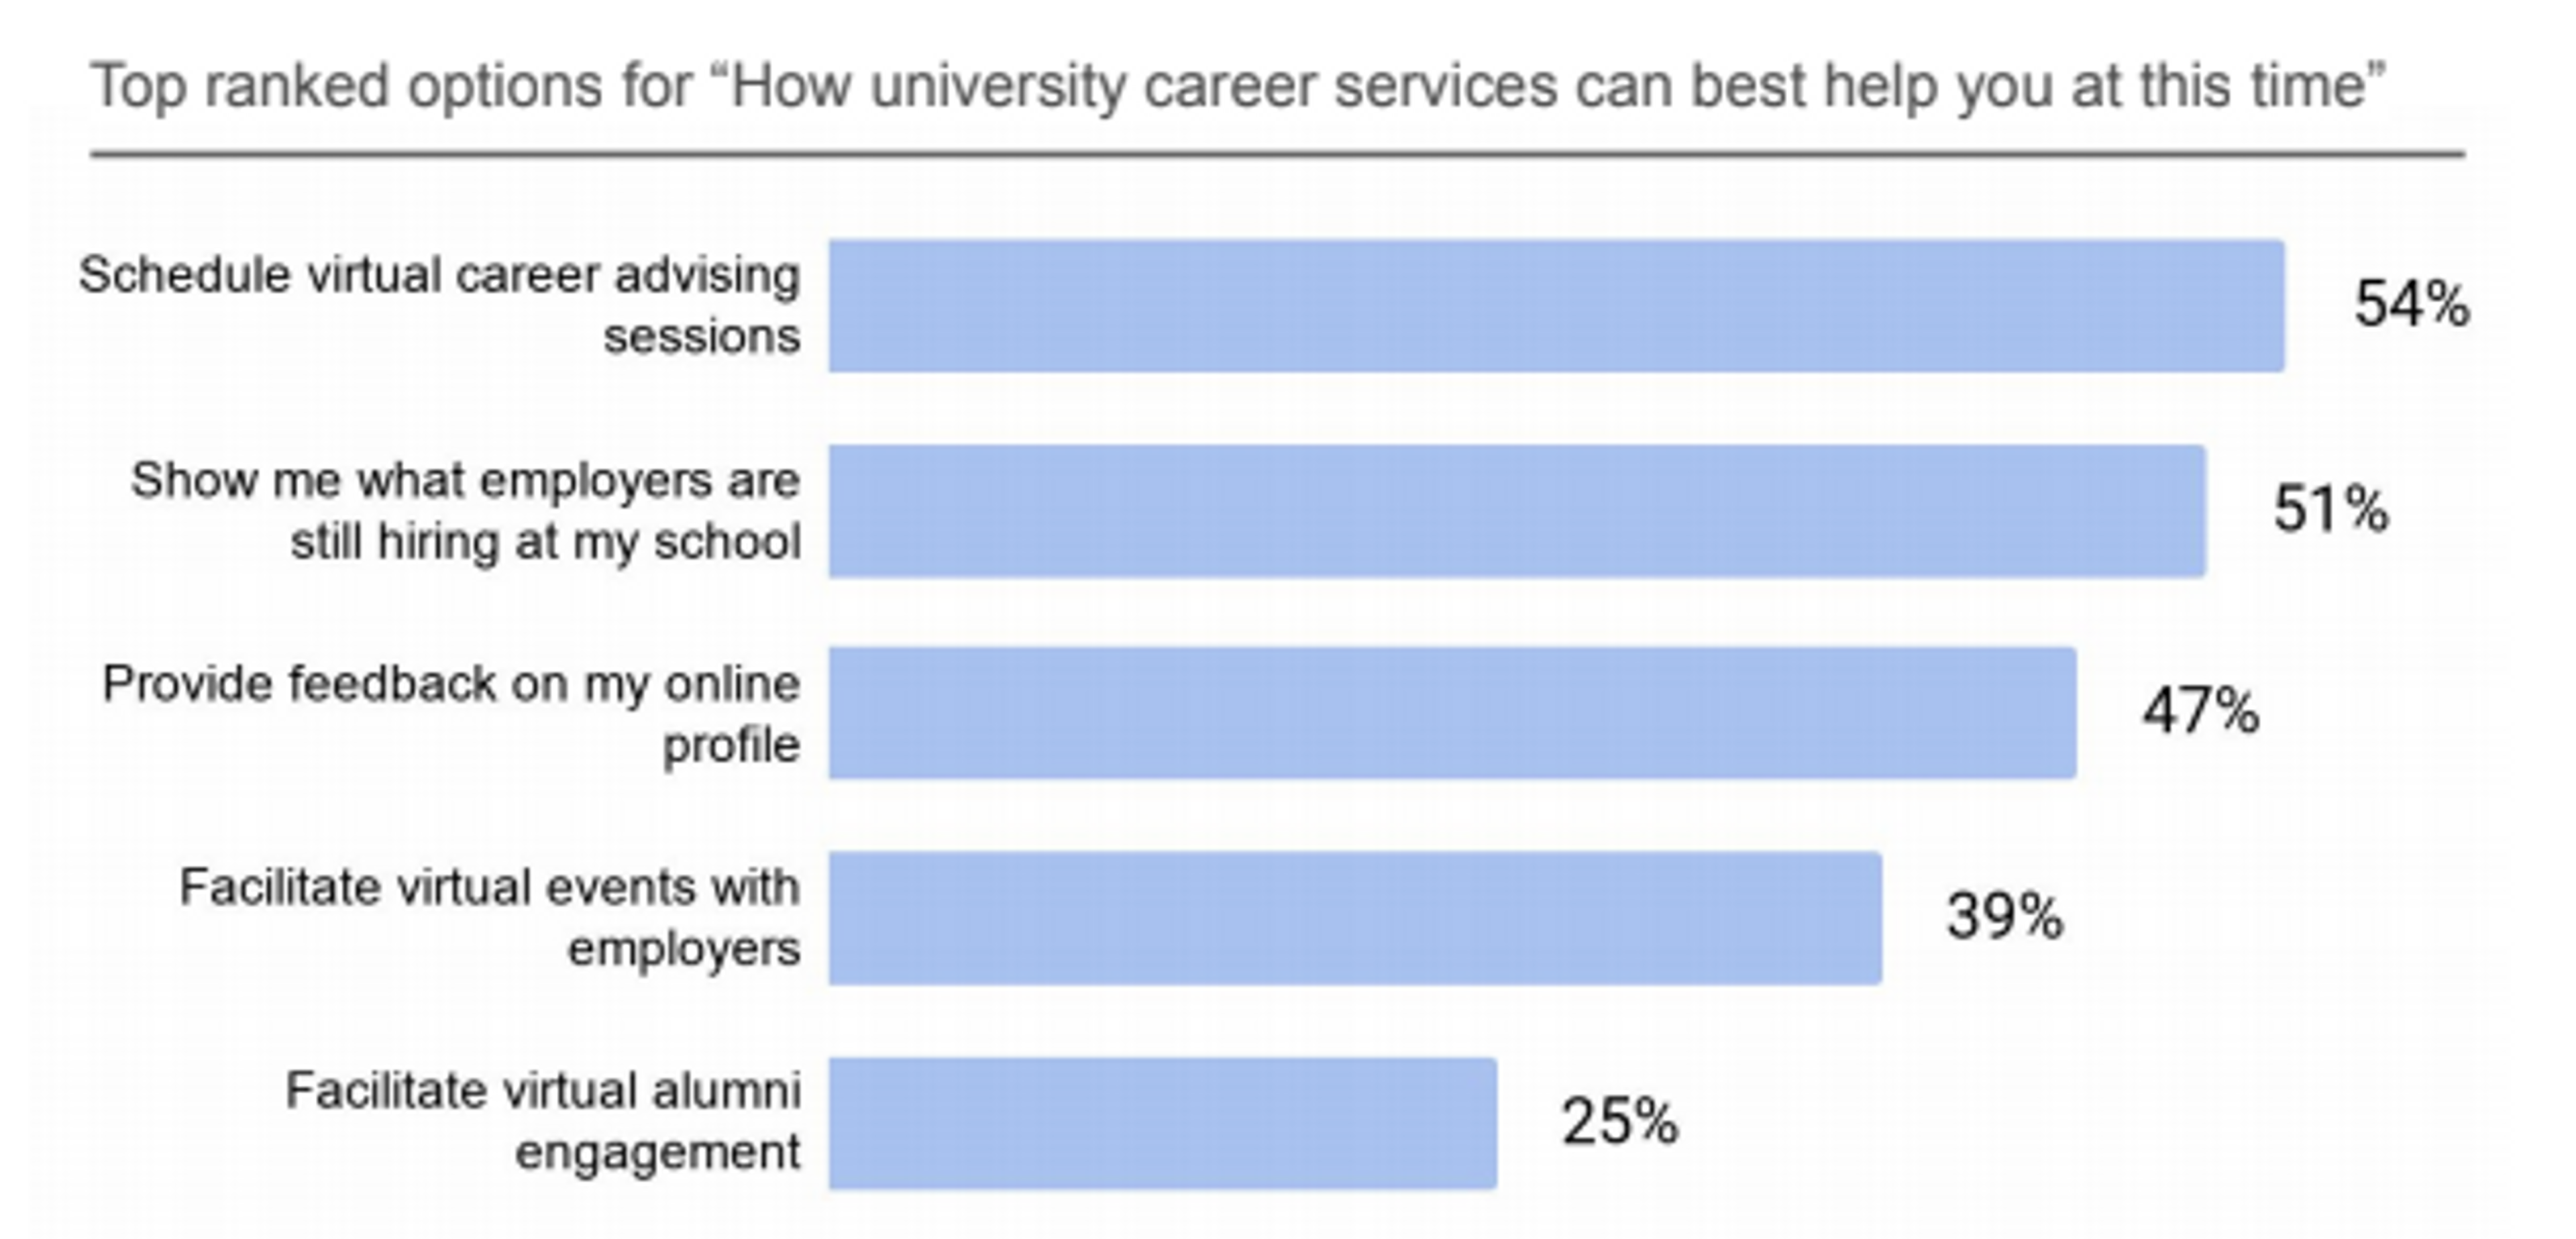 How university career services can best help students